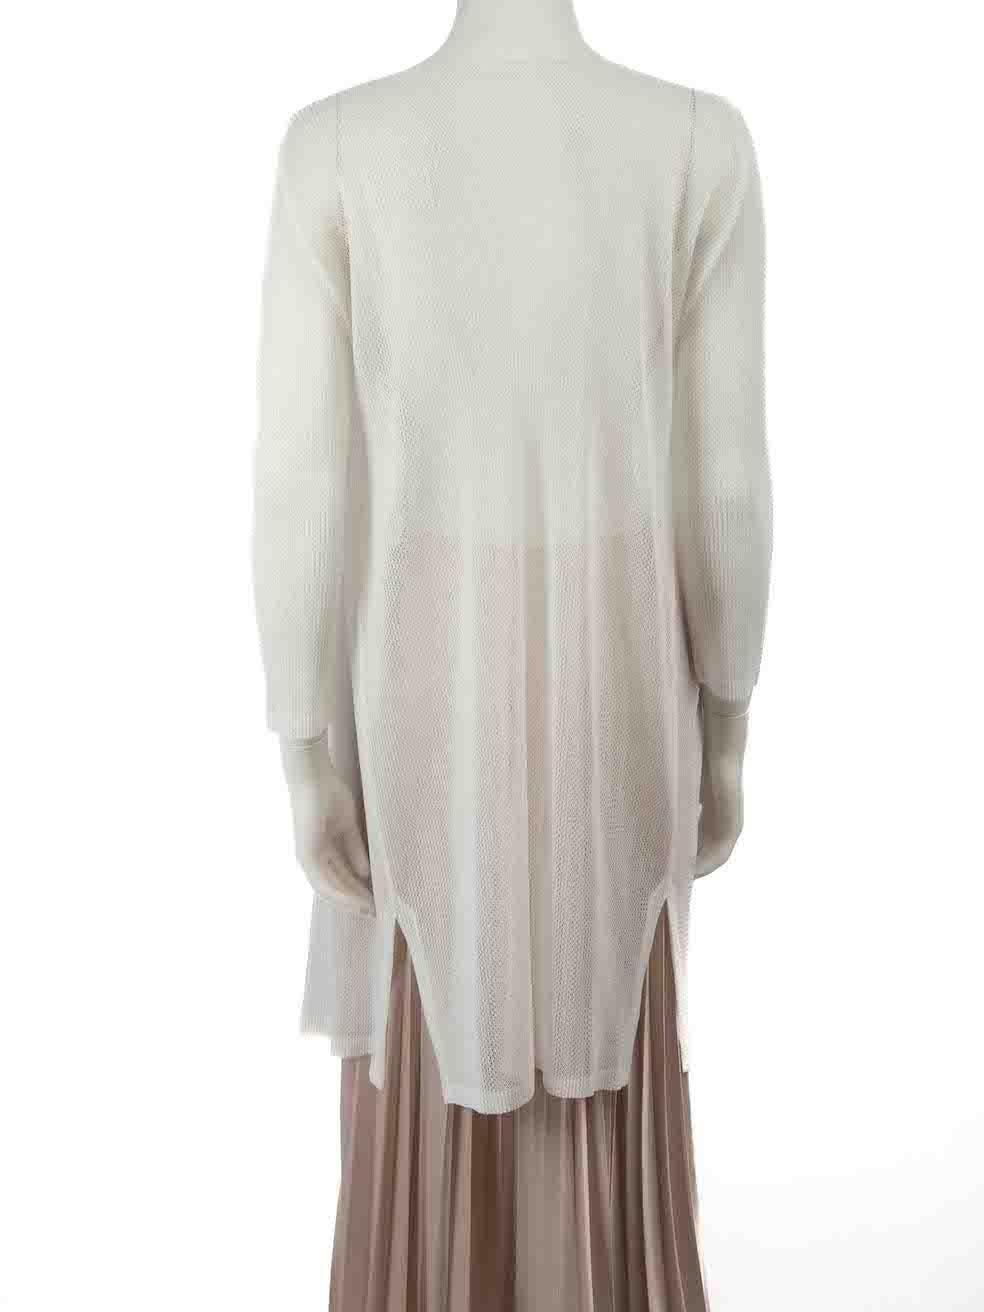 Issey Miyake Pleats Please White Mesh Textured Cardigan Size M In Good Condition For Sale In London, GB